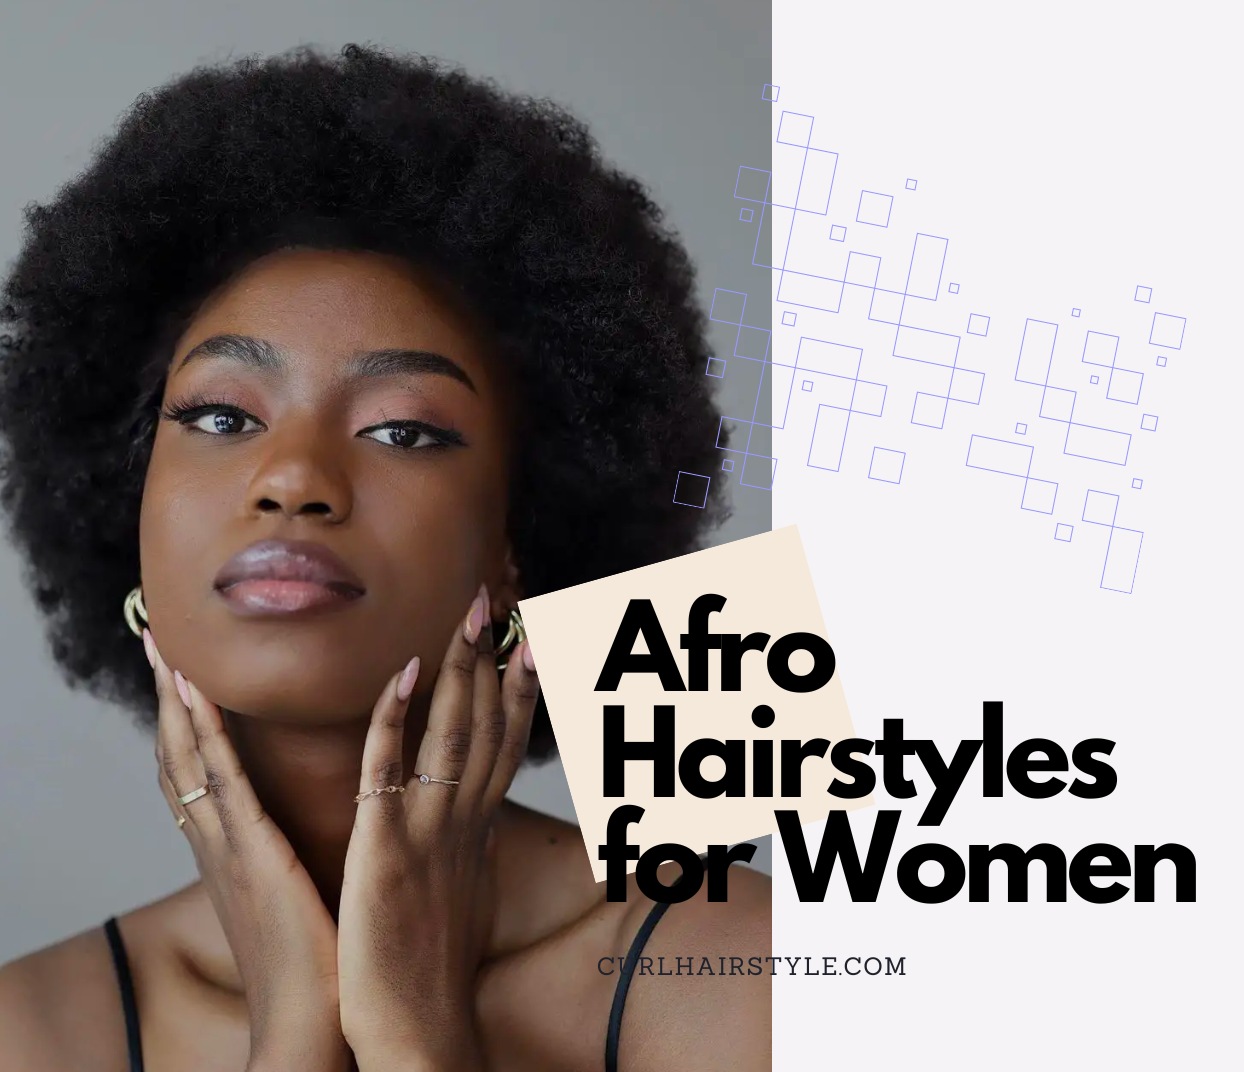 afro hairstyles for women